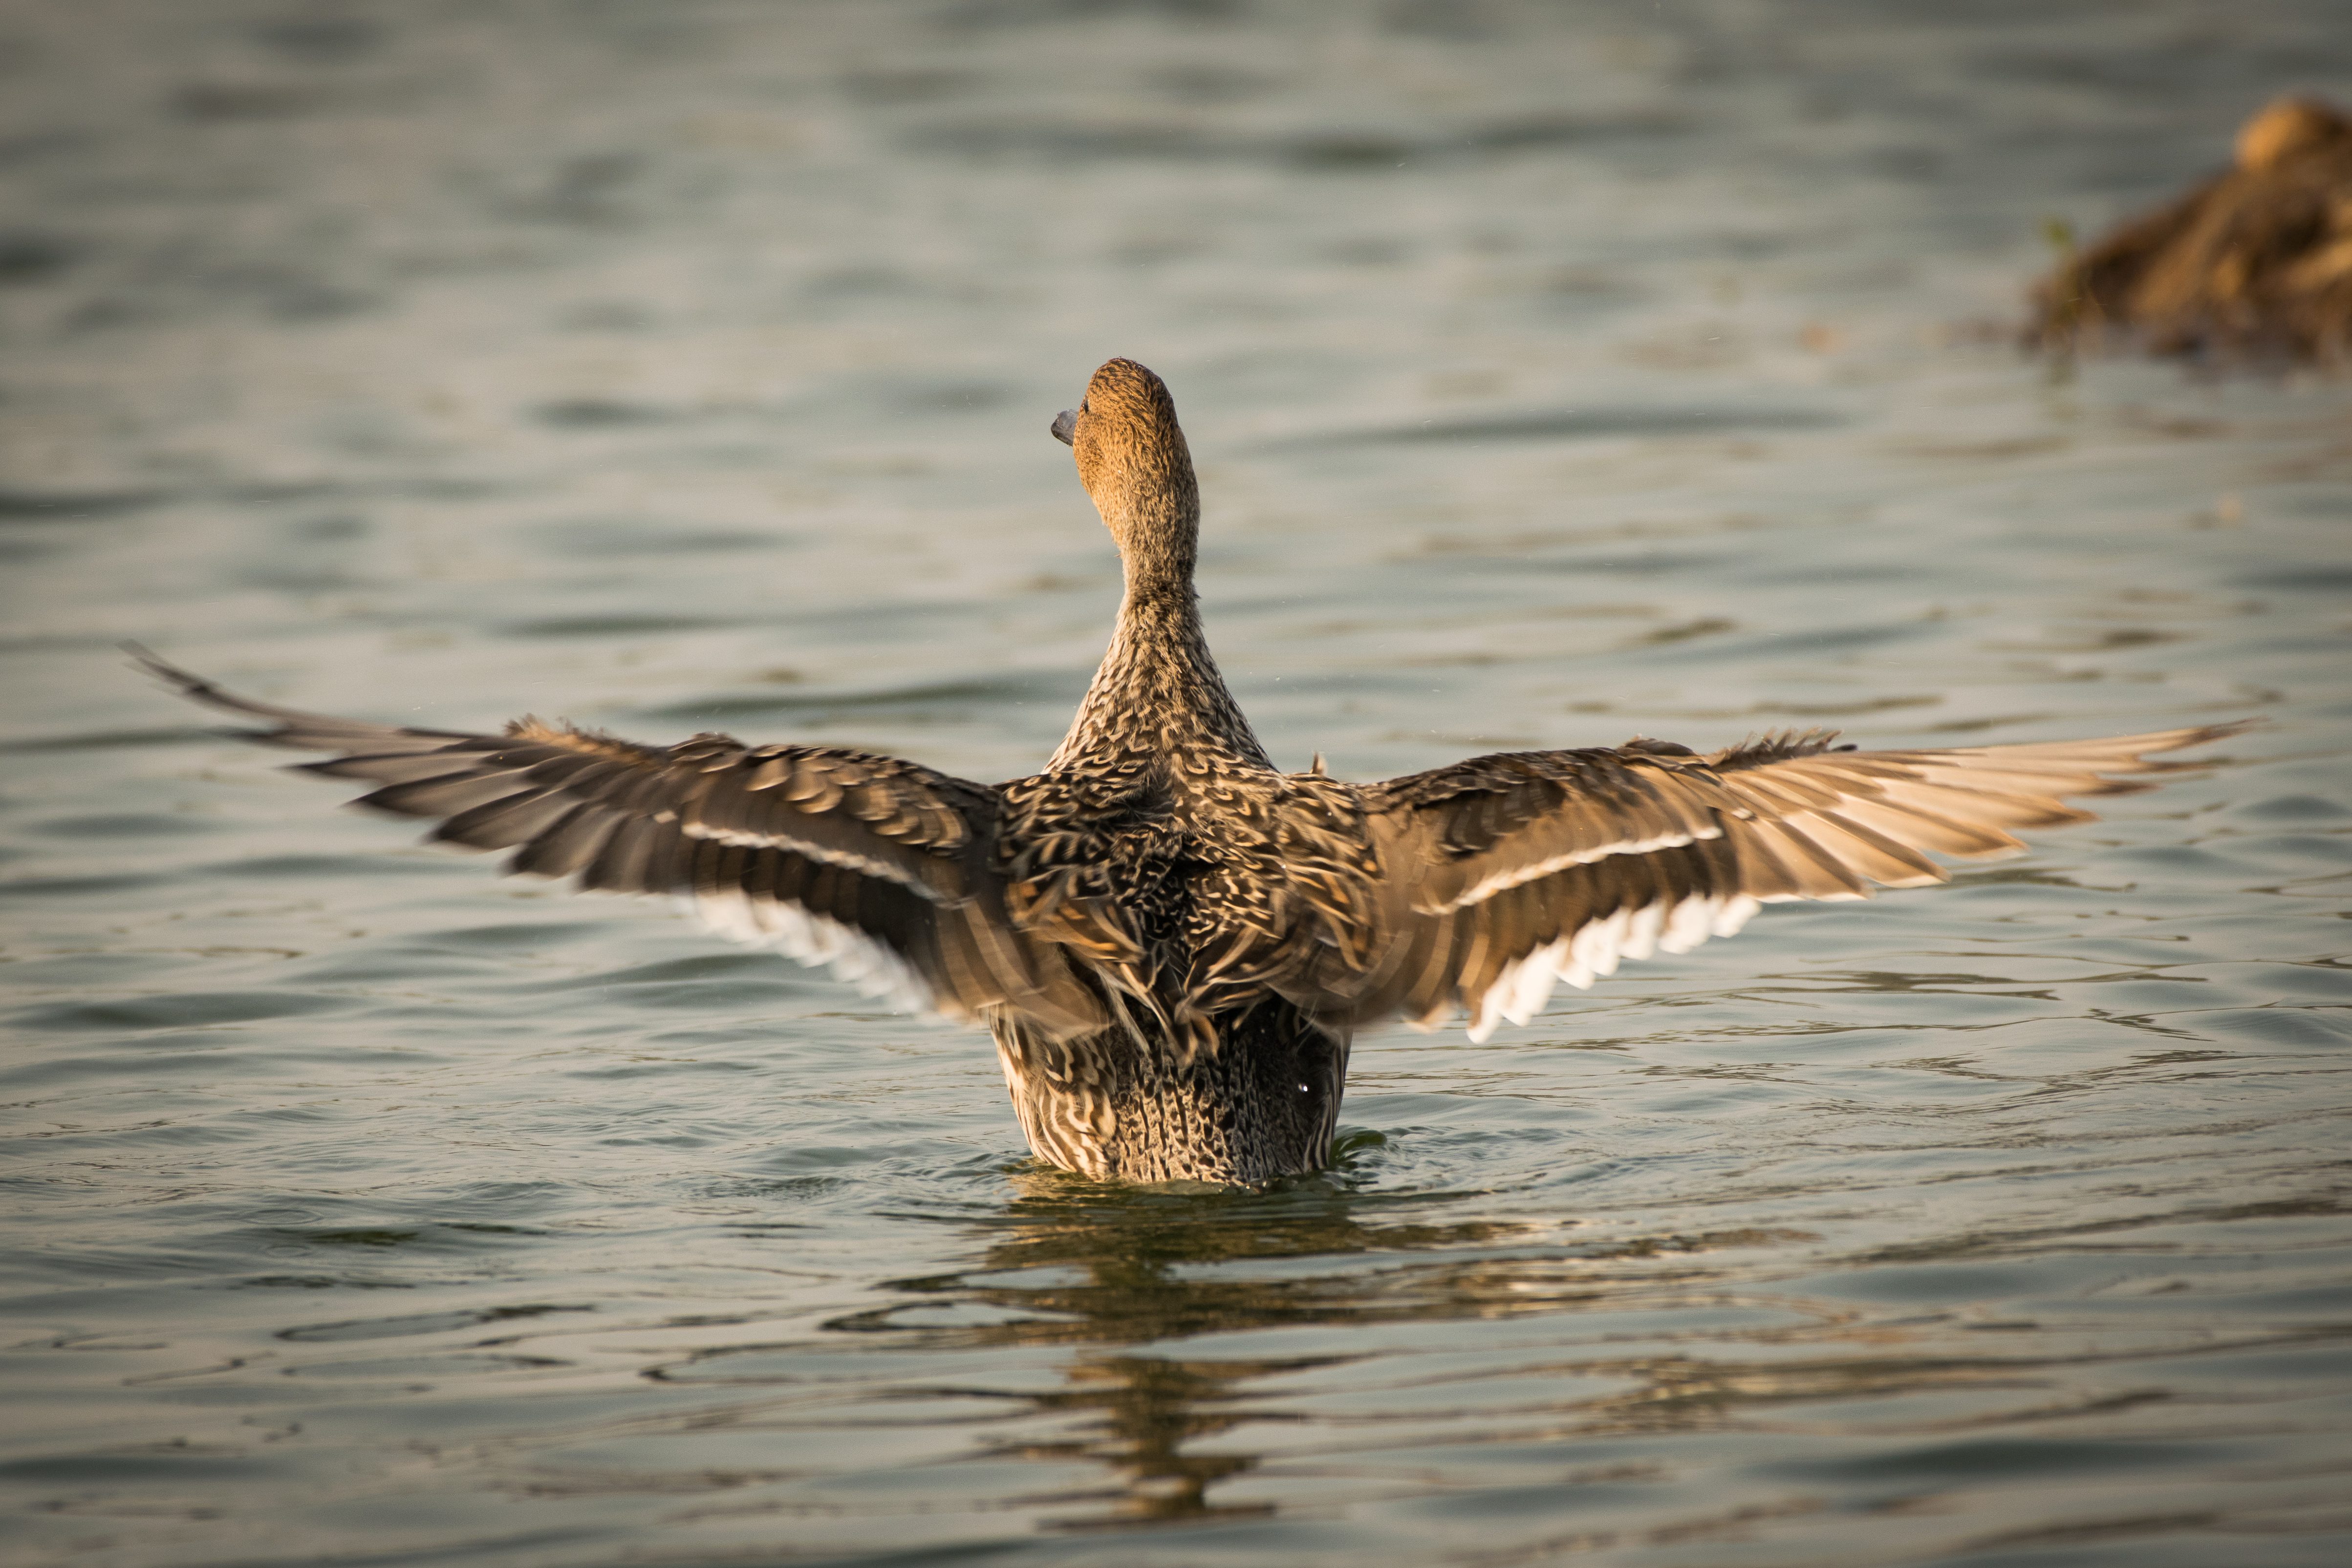 Northern pintail duck photo